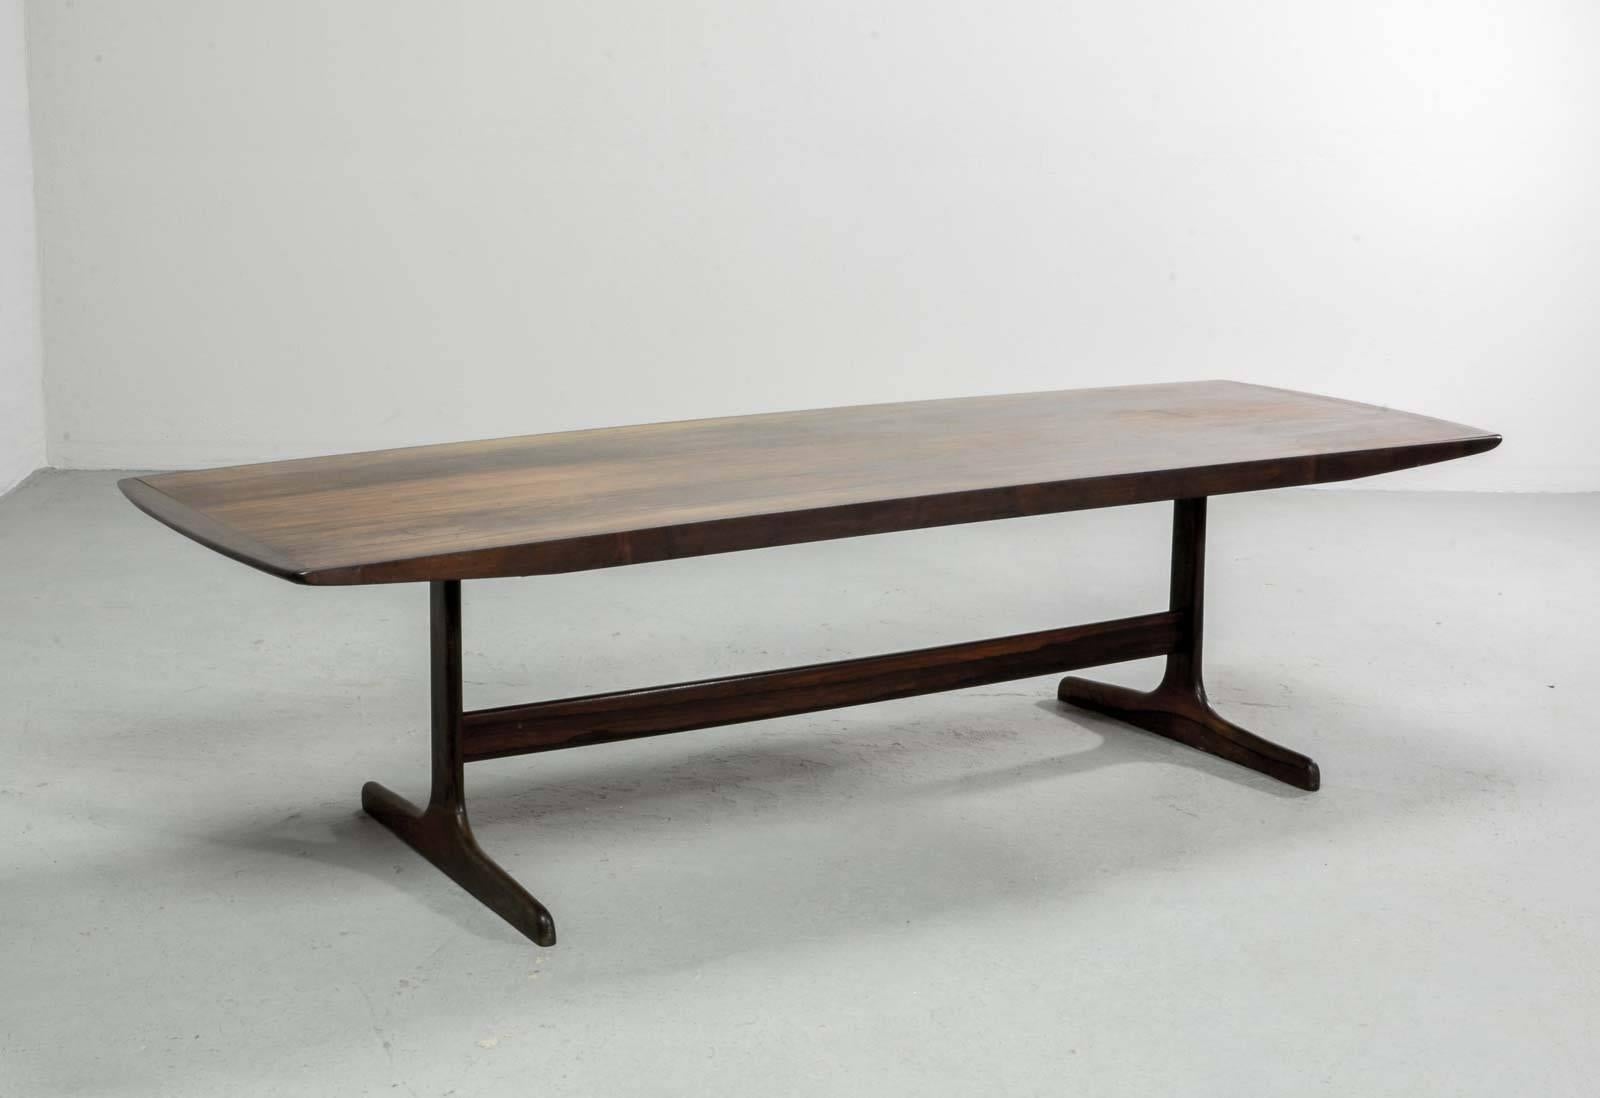 Dutch Design coffee table designed by the famous cabinet maker Fristho for Topform, The Netherlands in the 1960s. The table has solid rosewood legs and the top is made of wood with rosewood veneer.
The tabletop of this piece features a very nice